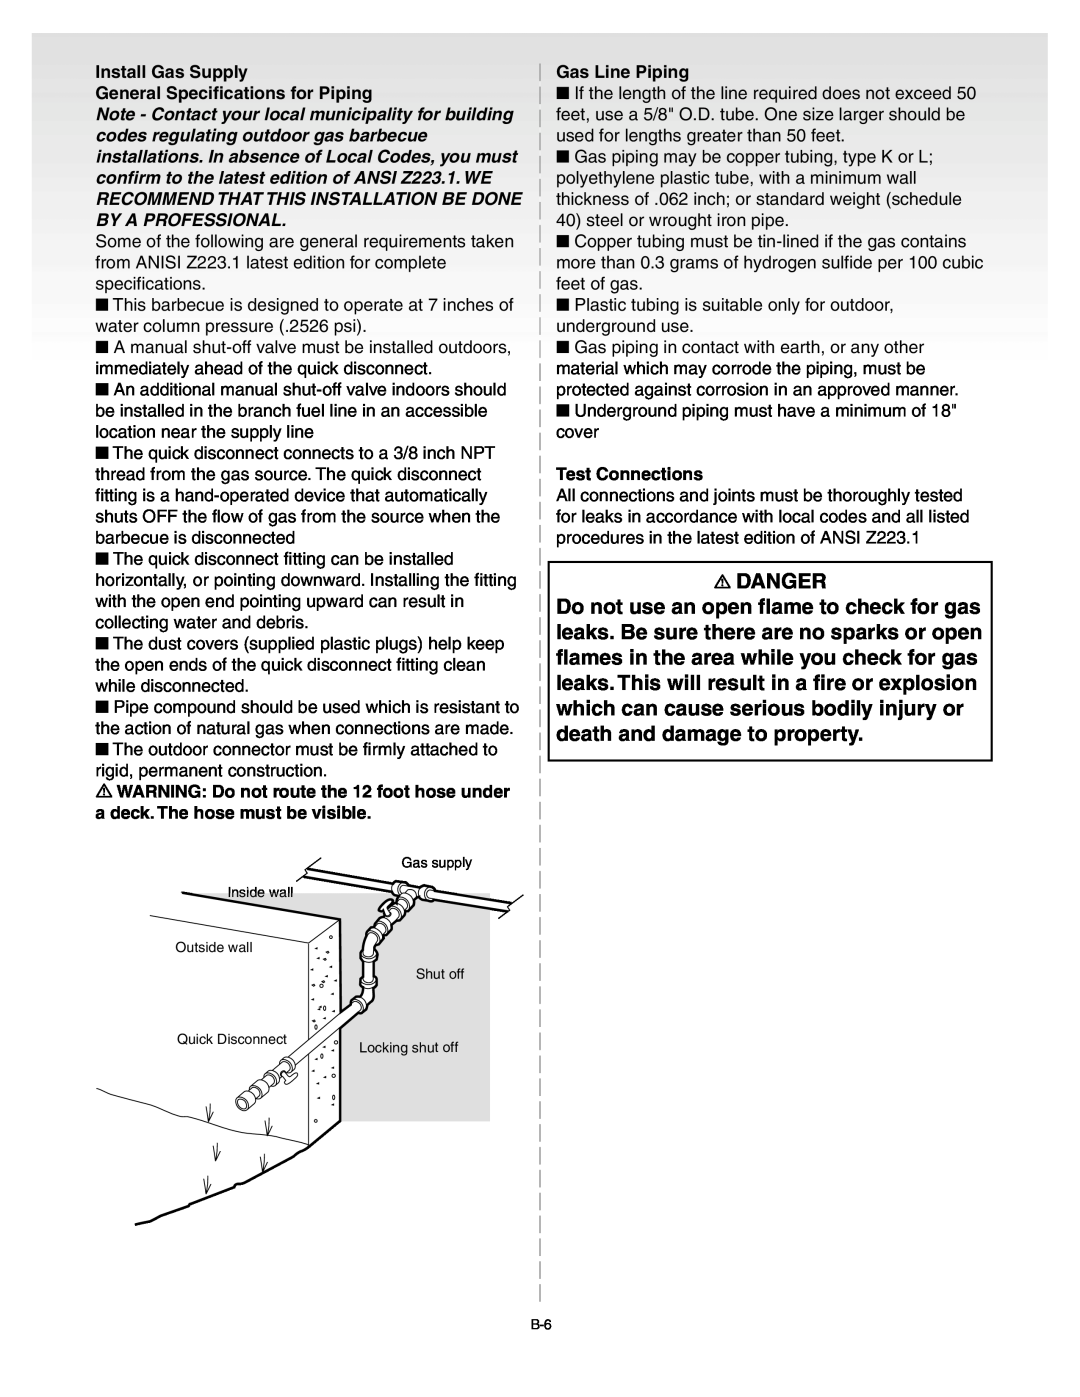 Weber C052.C, B067.E manual Danger, Install Gas Supply General Specifications for Piping, Gas Line Piping, Test Connections 